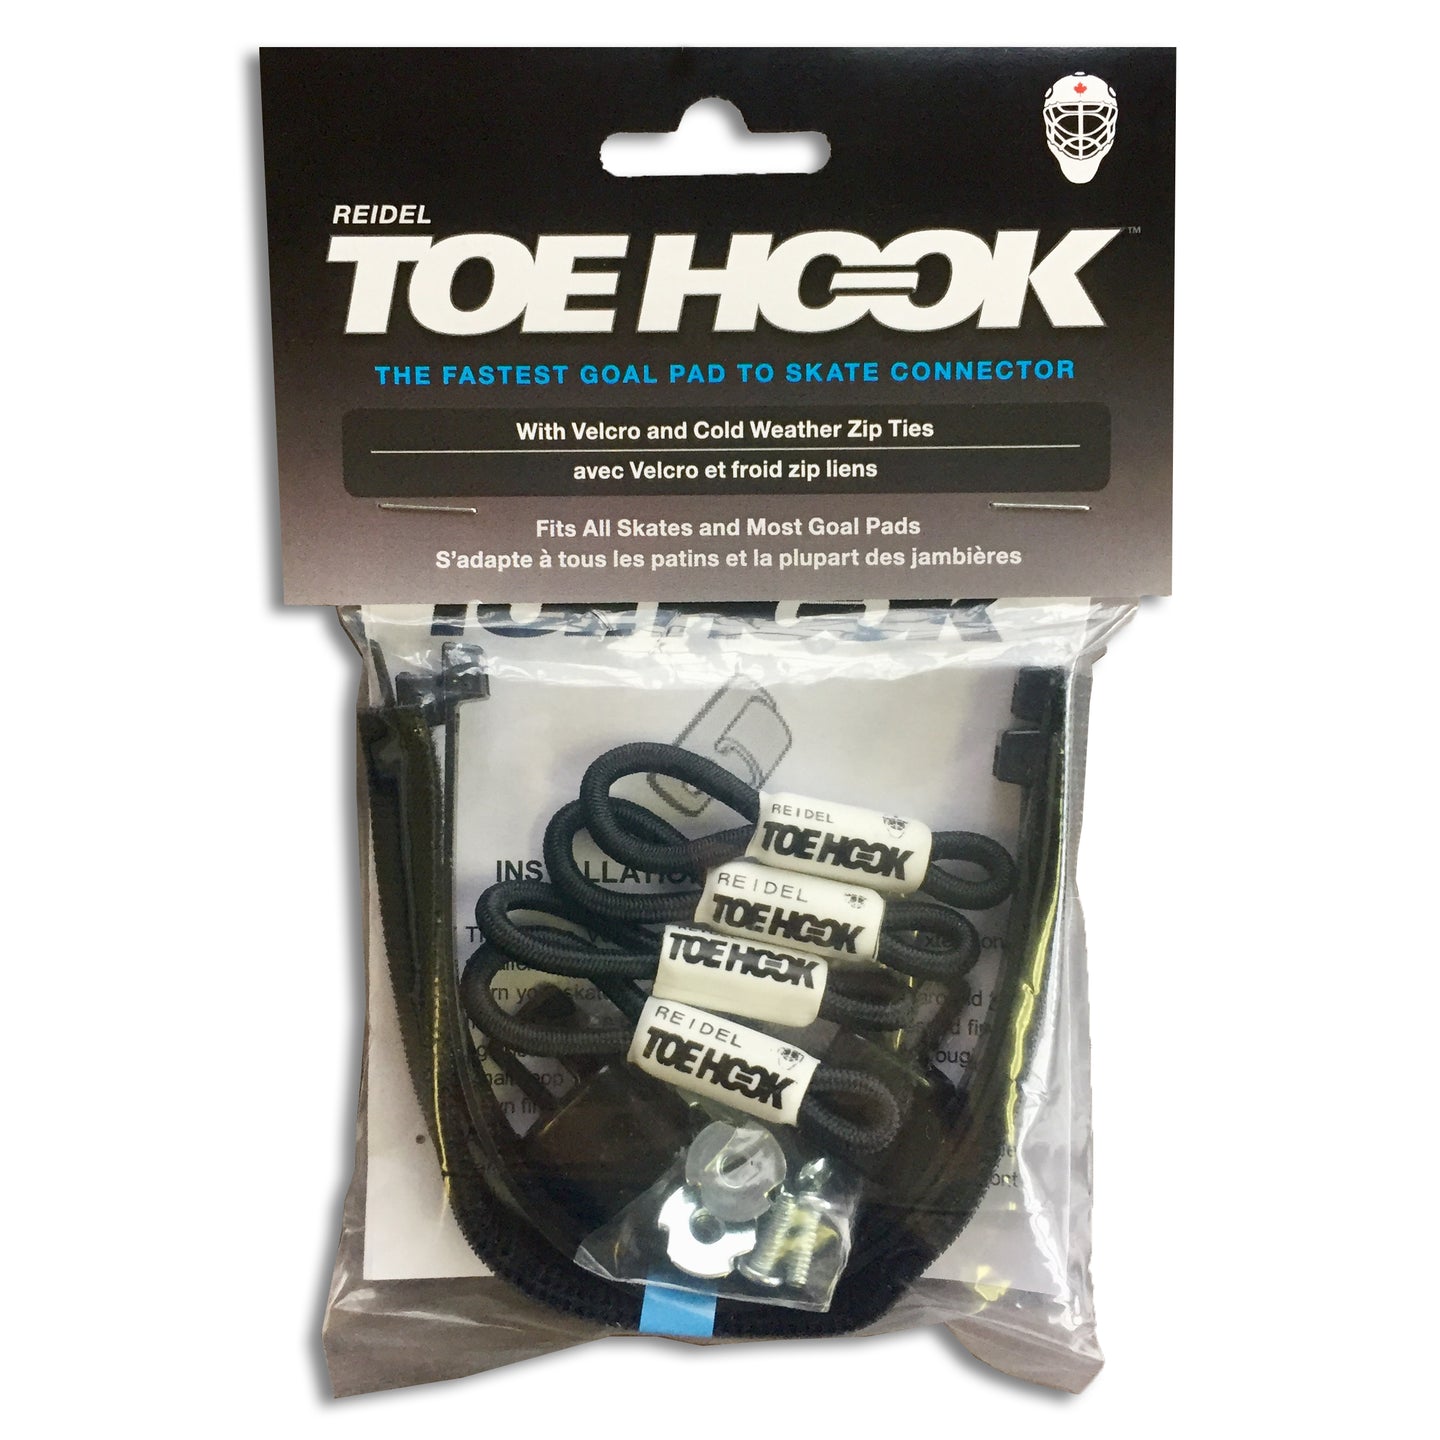 ToeHook Goal Pad to Skate Connector